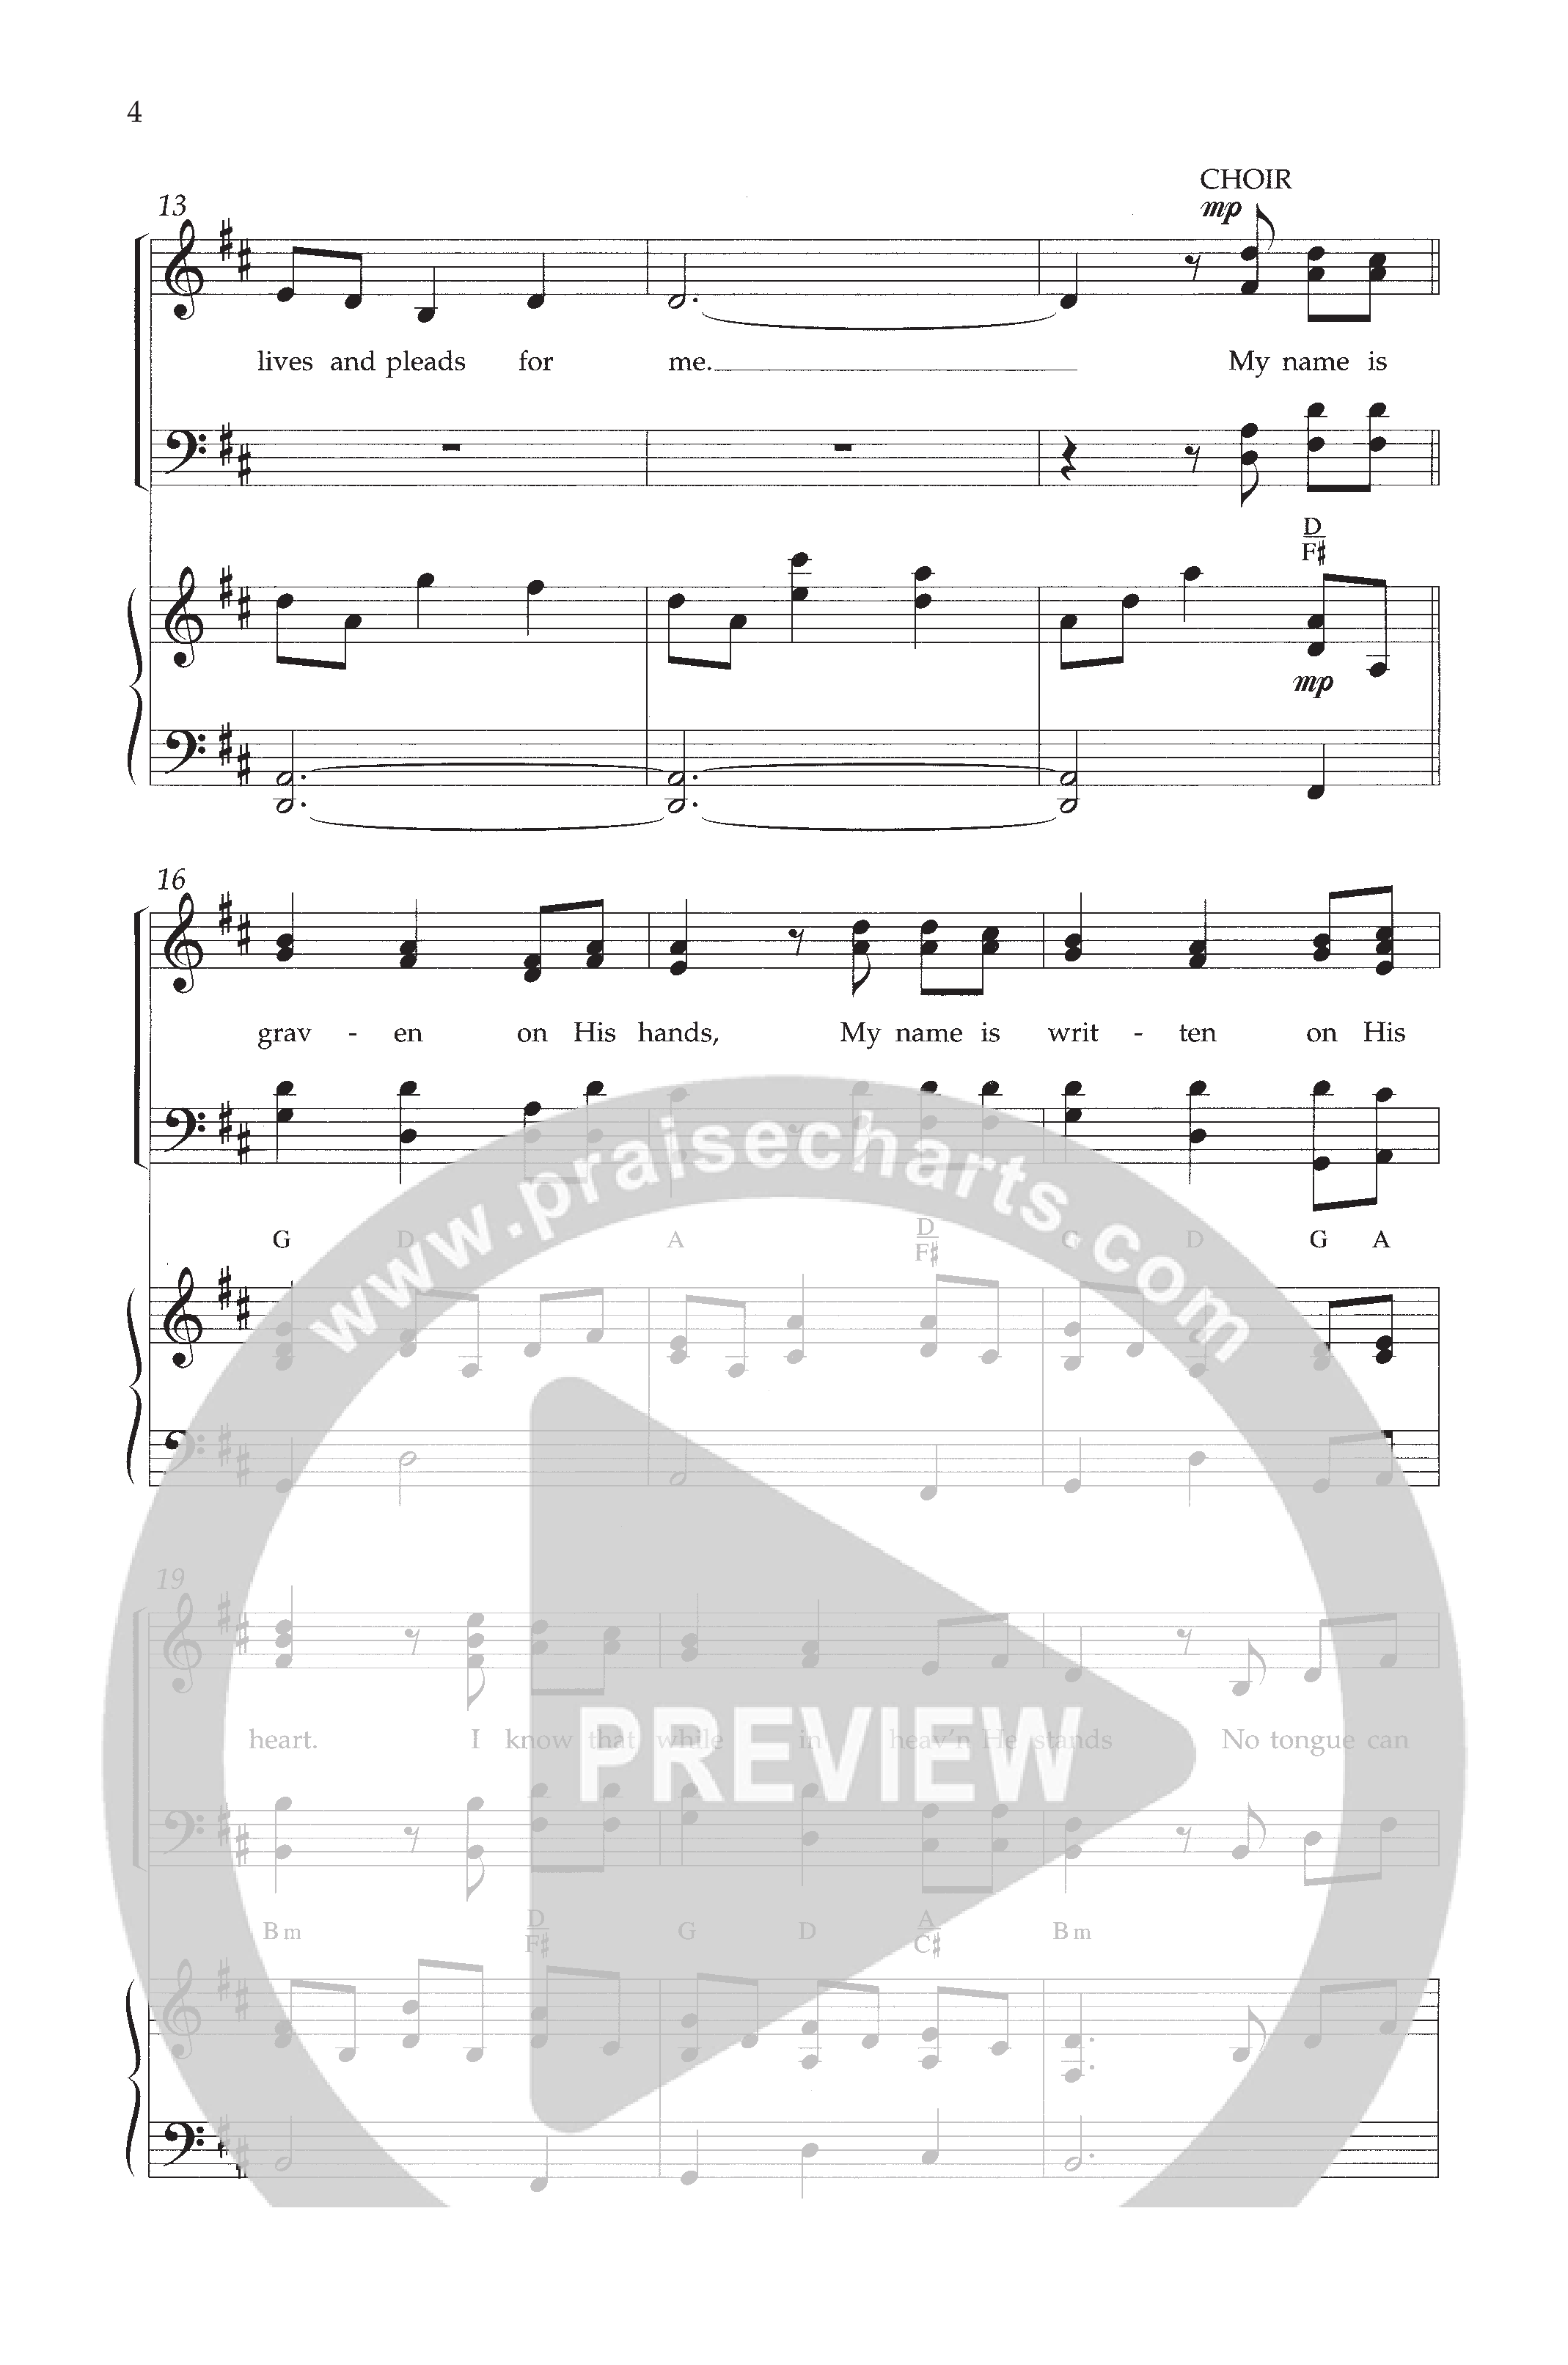 Before The Throne Of God Above (Choral Anthem SATB) Anthem (SATB/Piano) (Lifeway Choral / Arr. Camp Kirkland)